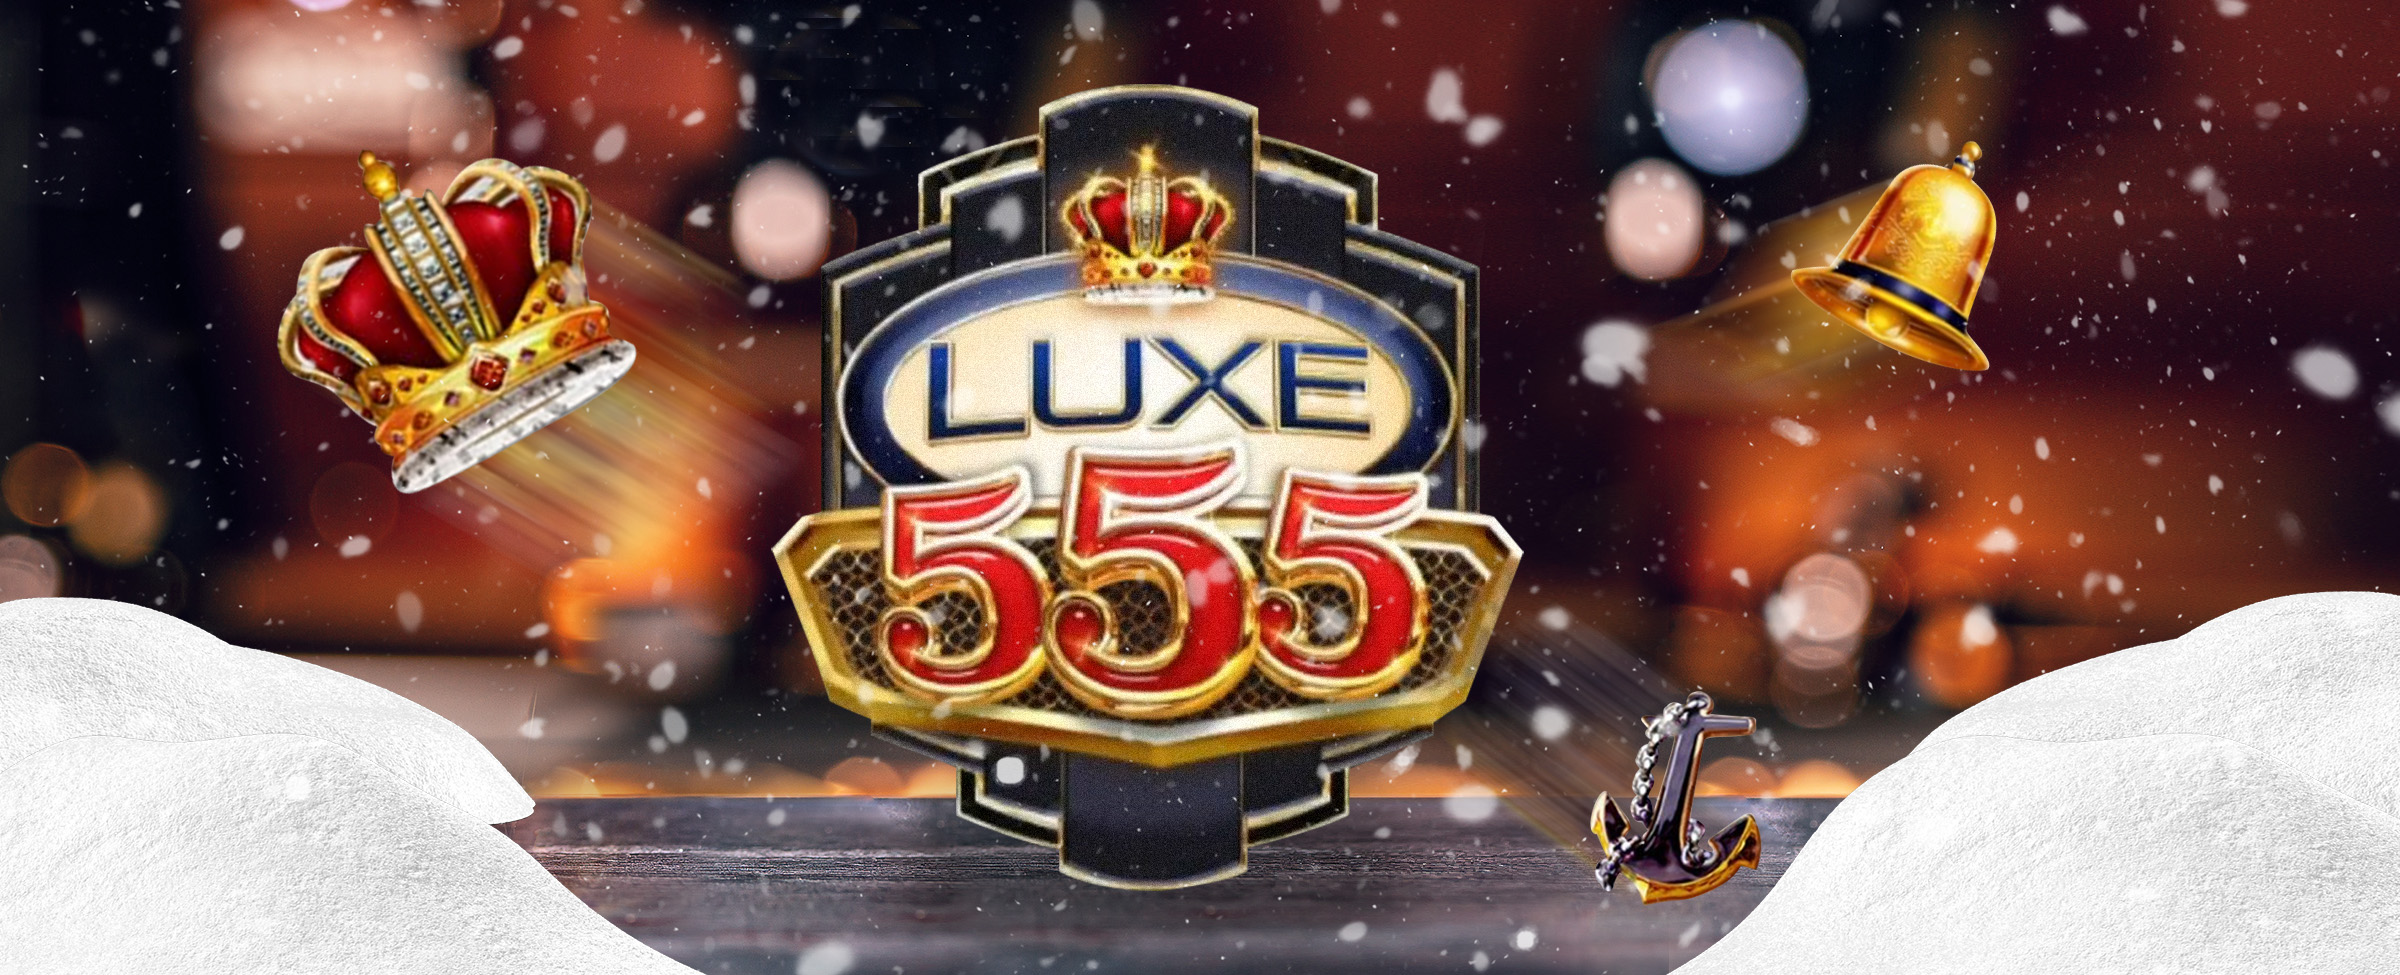 A dining table appears in the foreground flanked by mounds of snow set against an out of focus diner, while the Luxe 555 logo from the Cafe Casino slot game features in the middle, and a royal crown flying diagonally from the logo on one side, and a golden bell on the other.